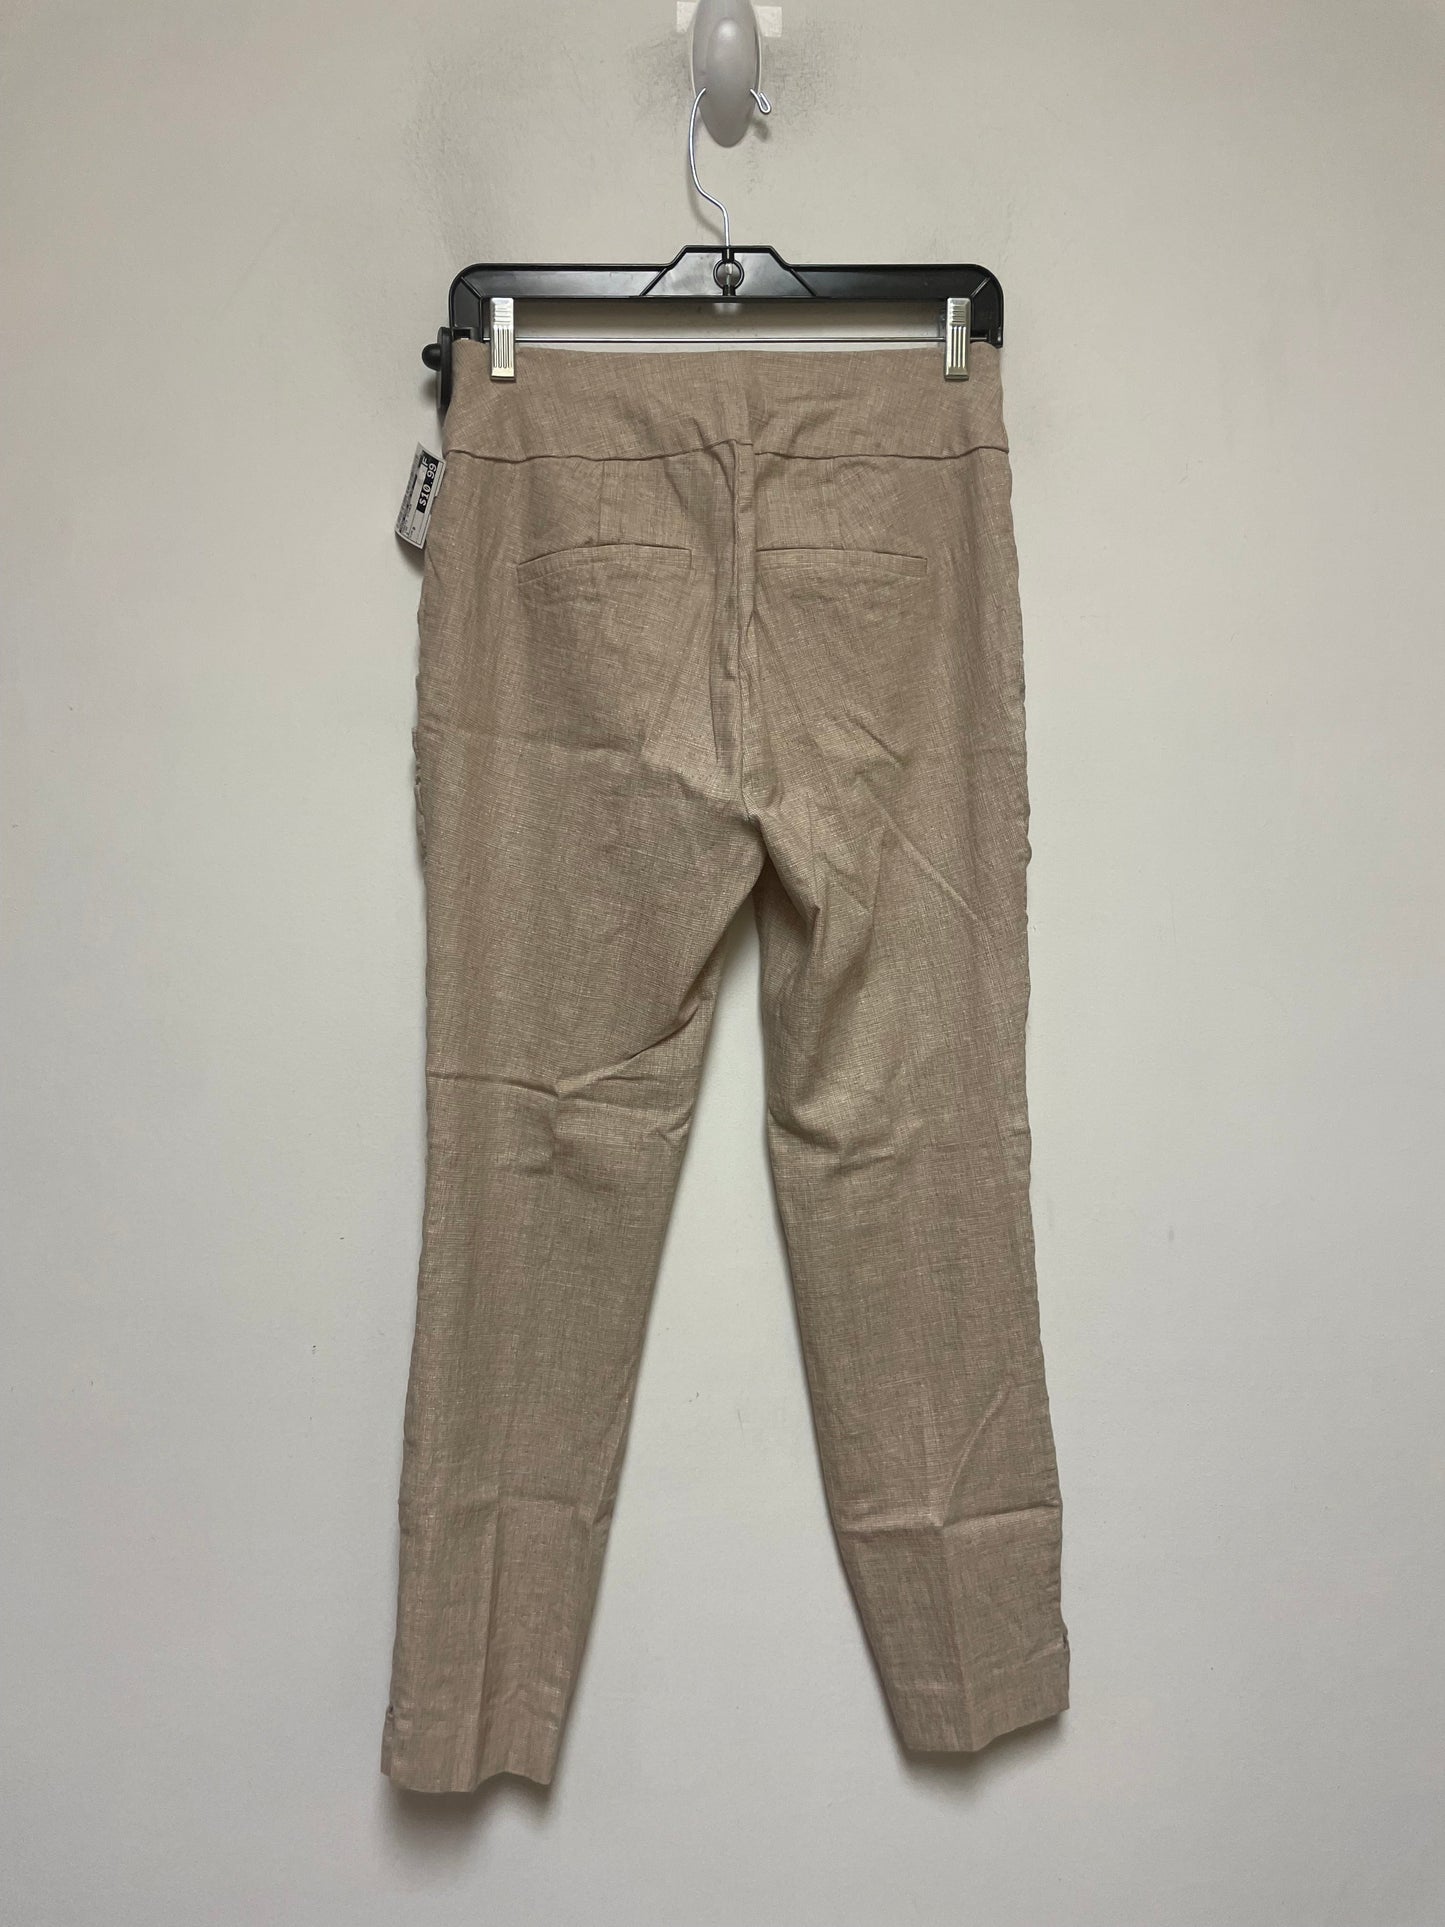 Tan Pants Other New York And Co, Size 8